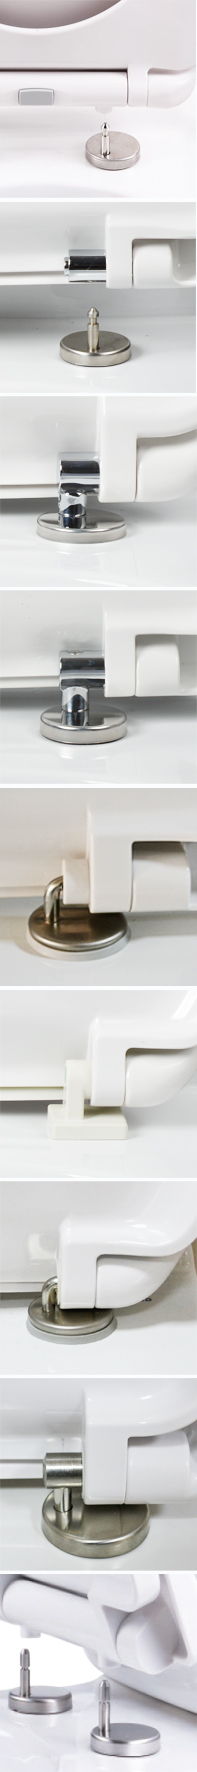 Toilet Seat Assembly Hinges